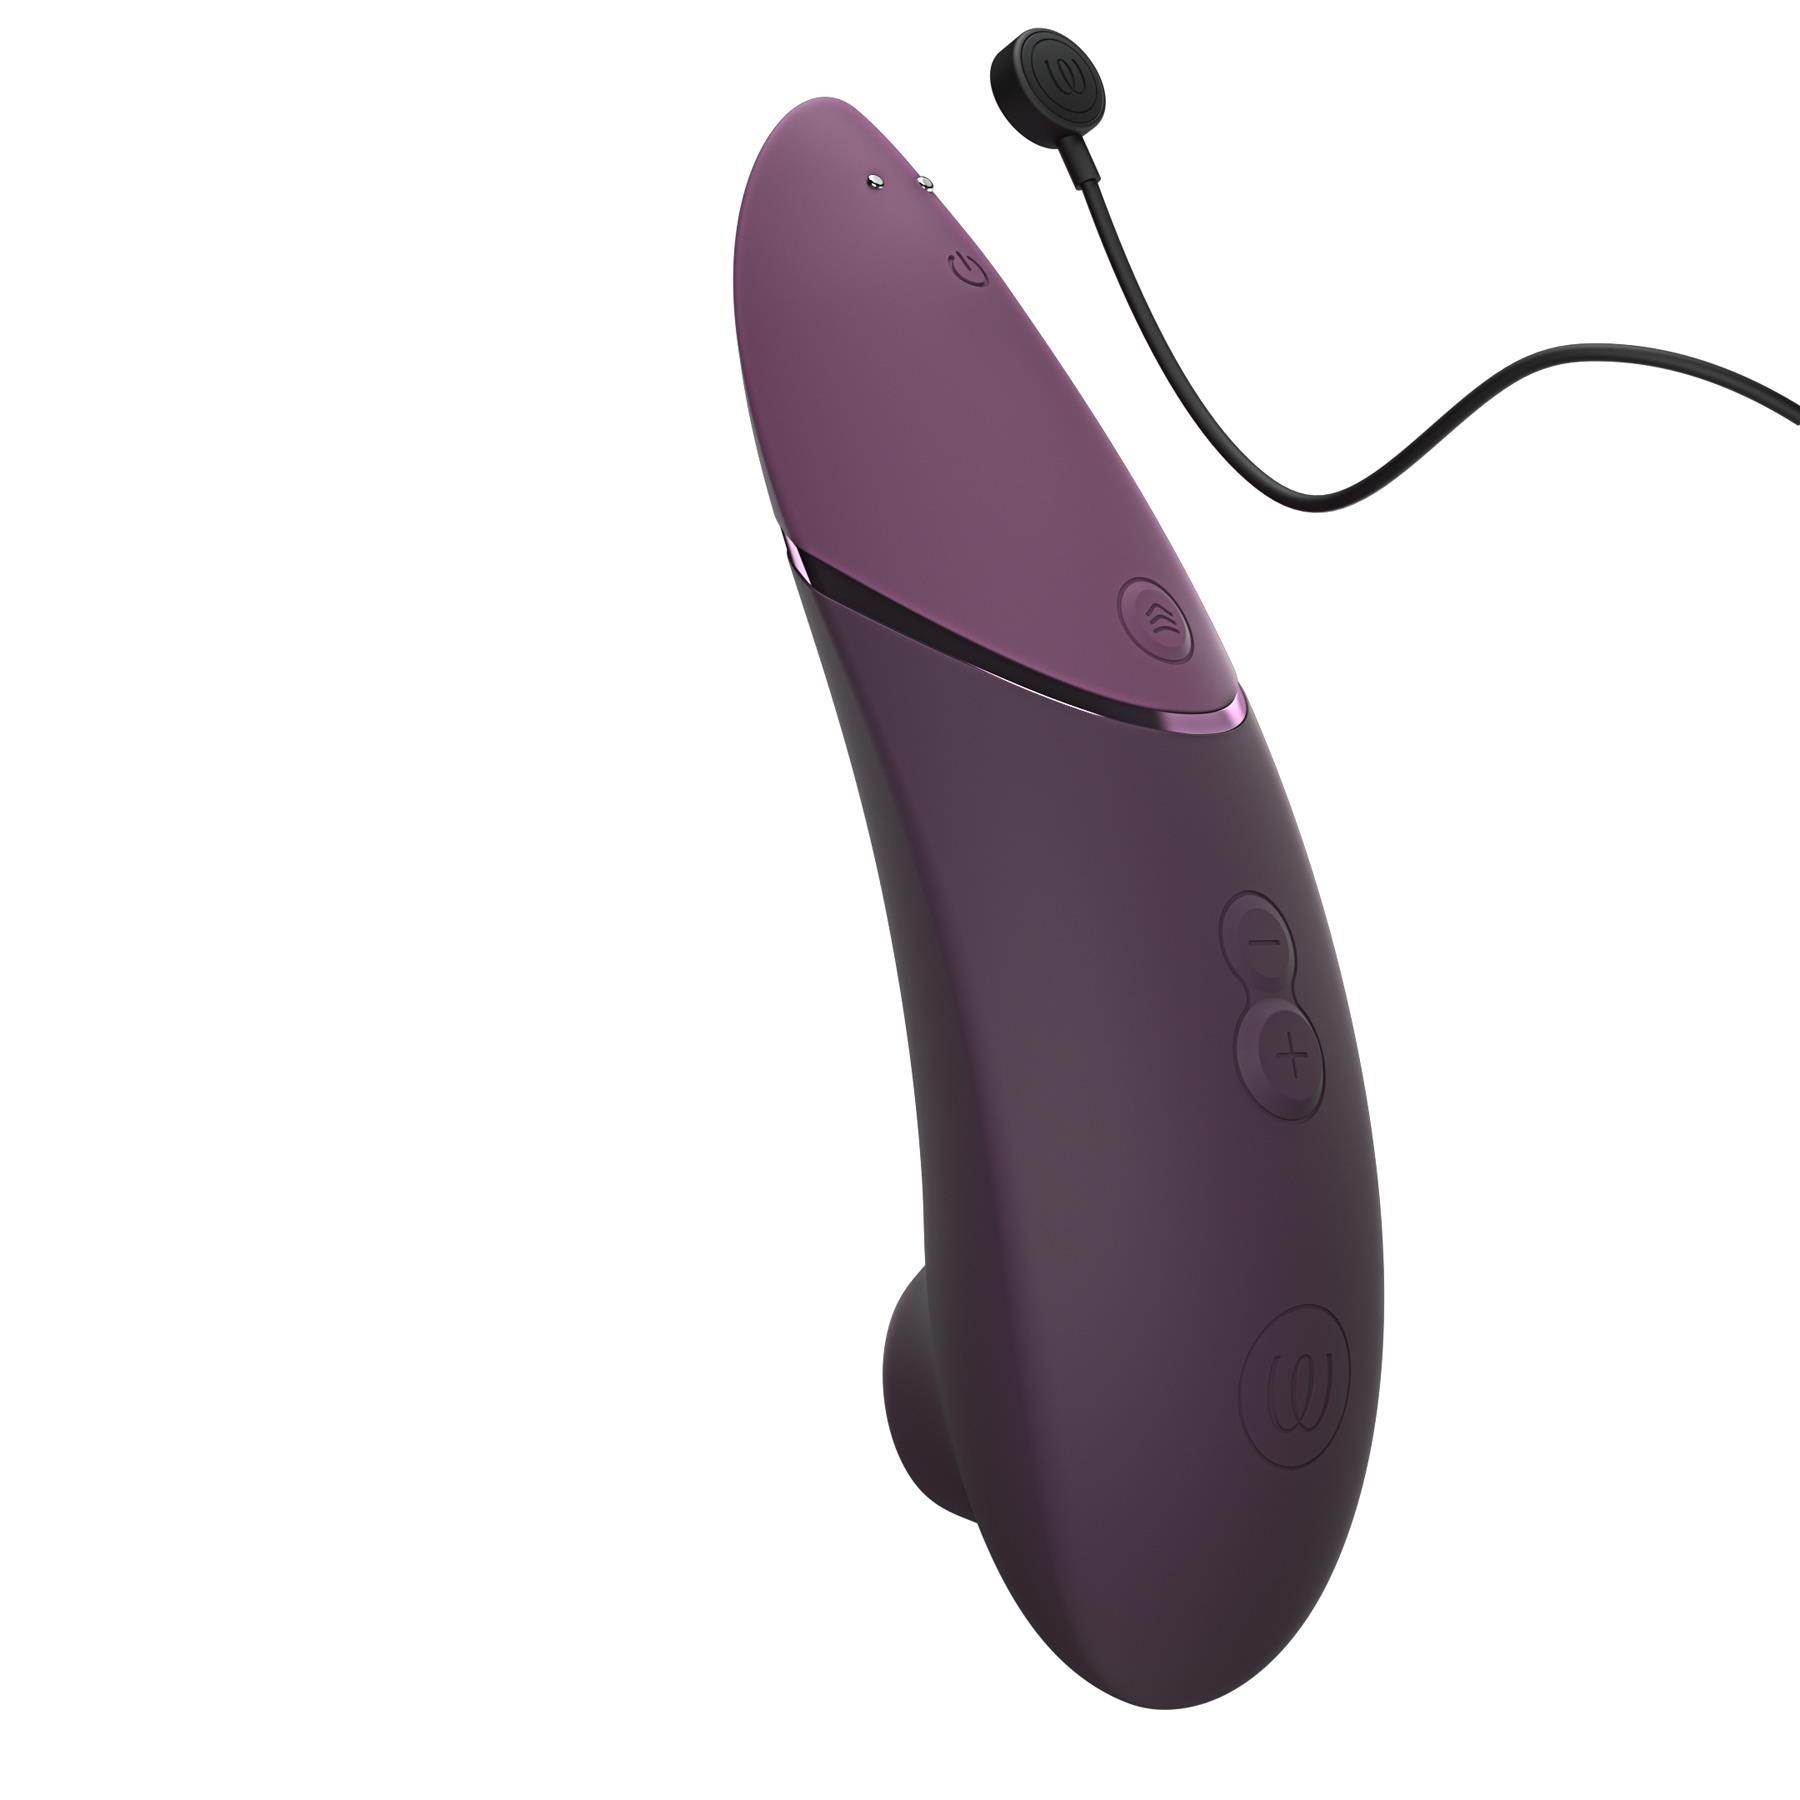 Womanizer Next Pleasure Air Clitoral Stimulator- Showing Where Charging Cable is Placed